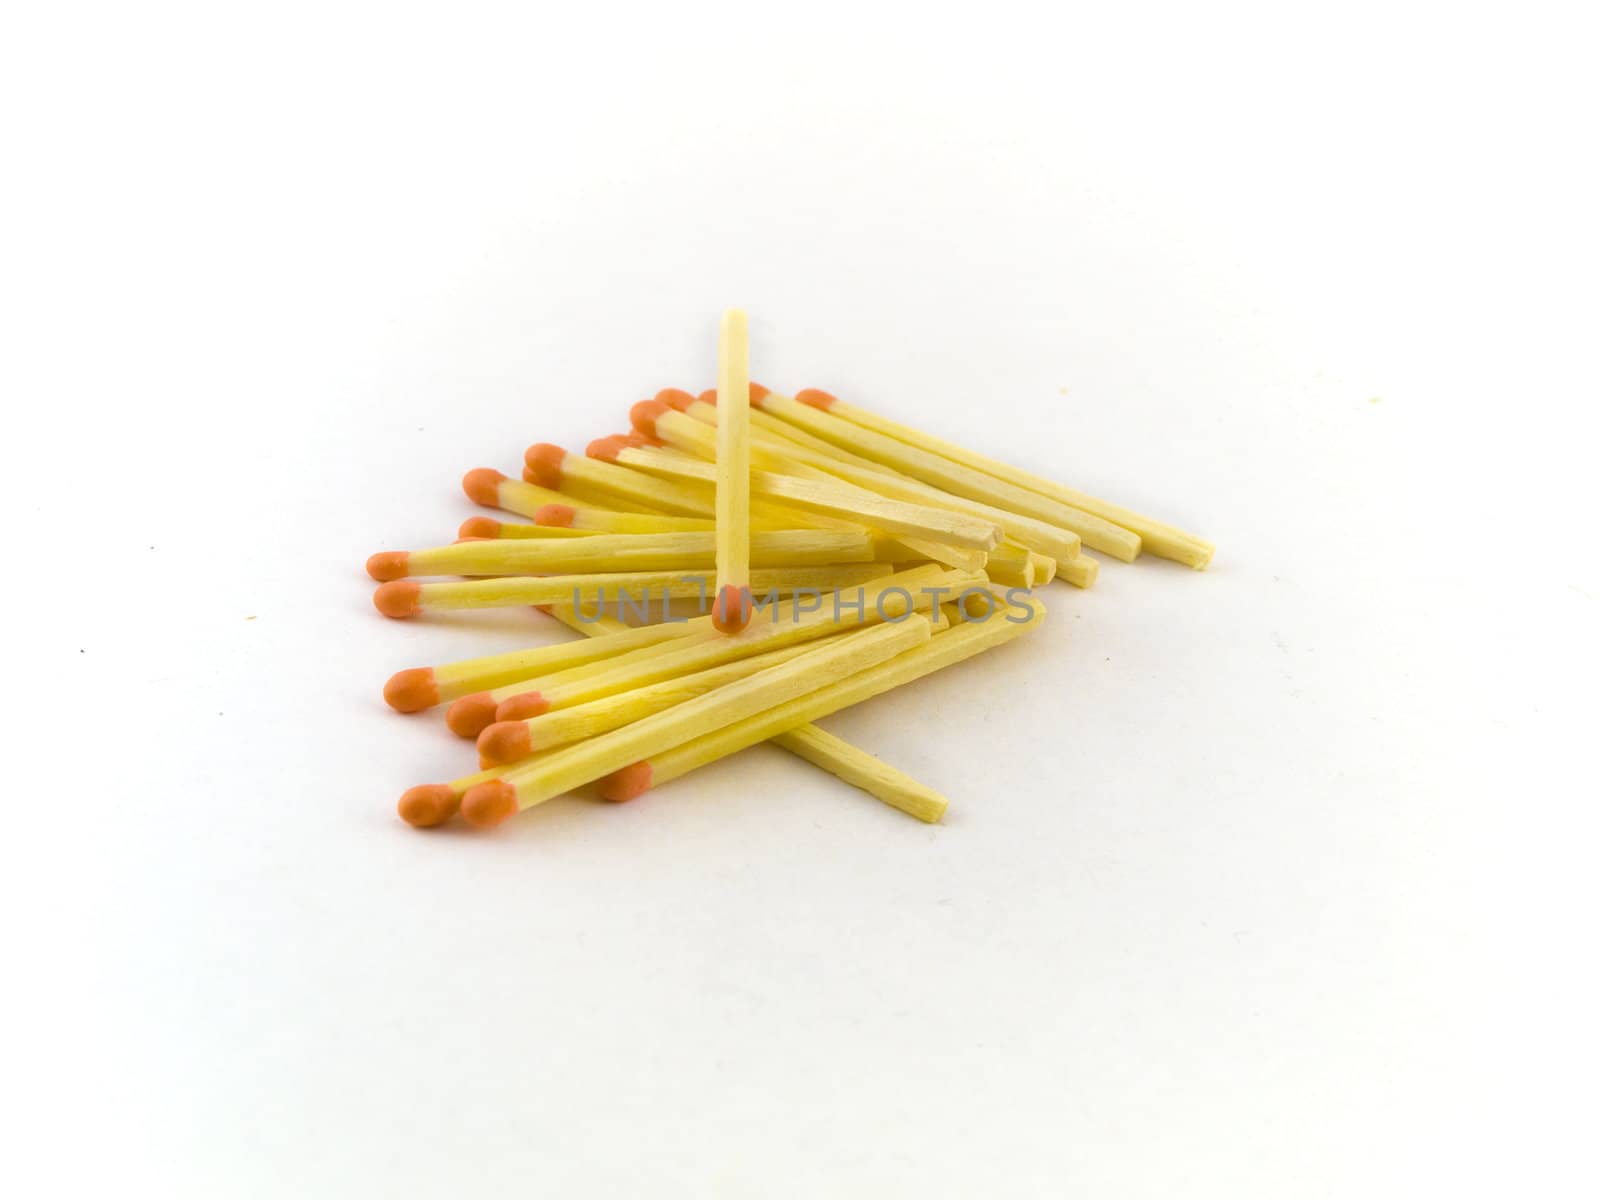 Matches on White Background